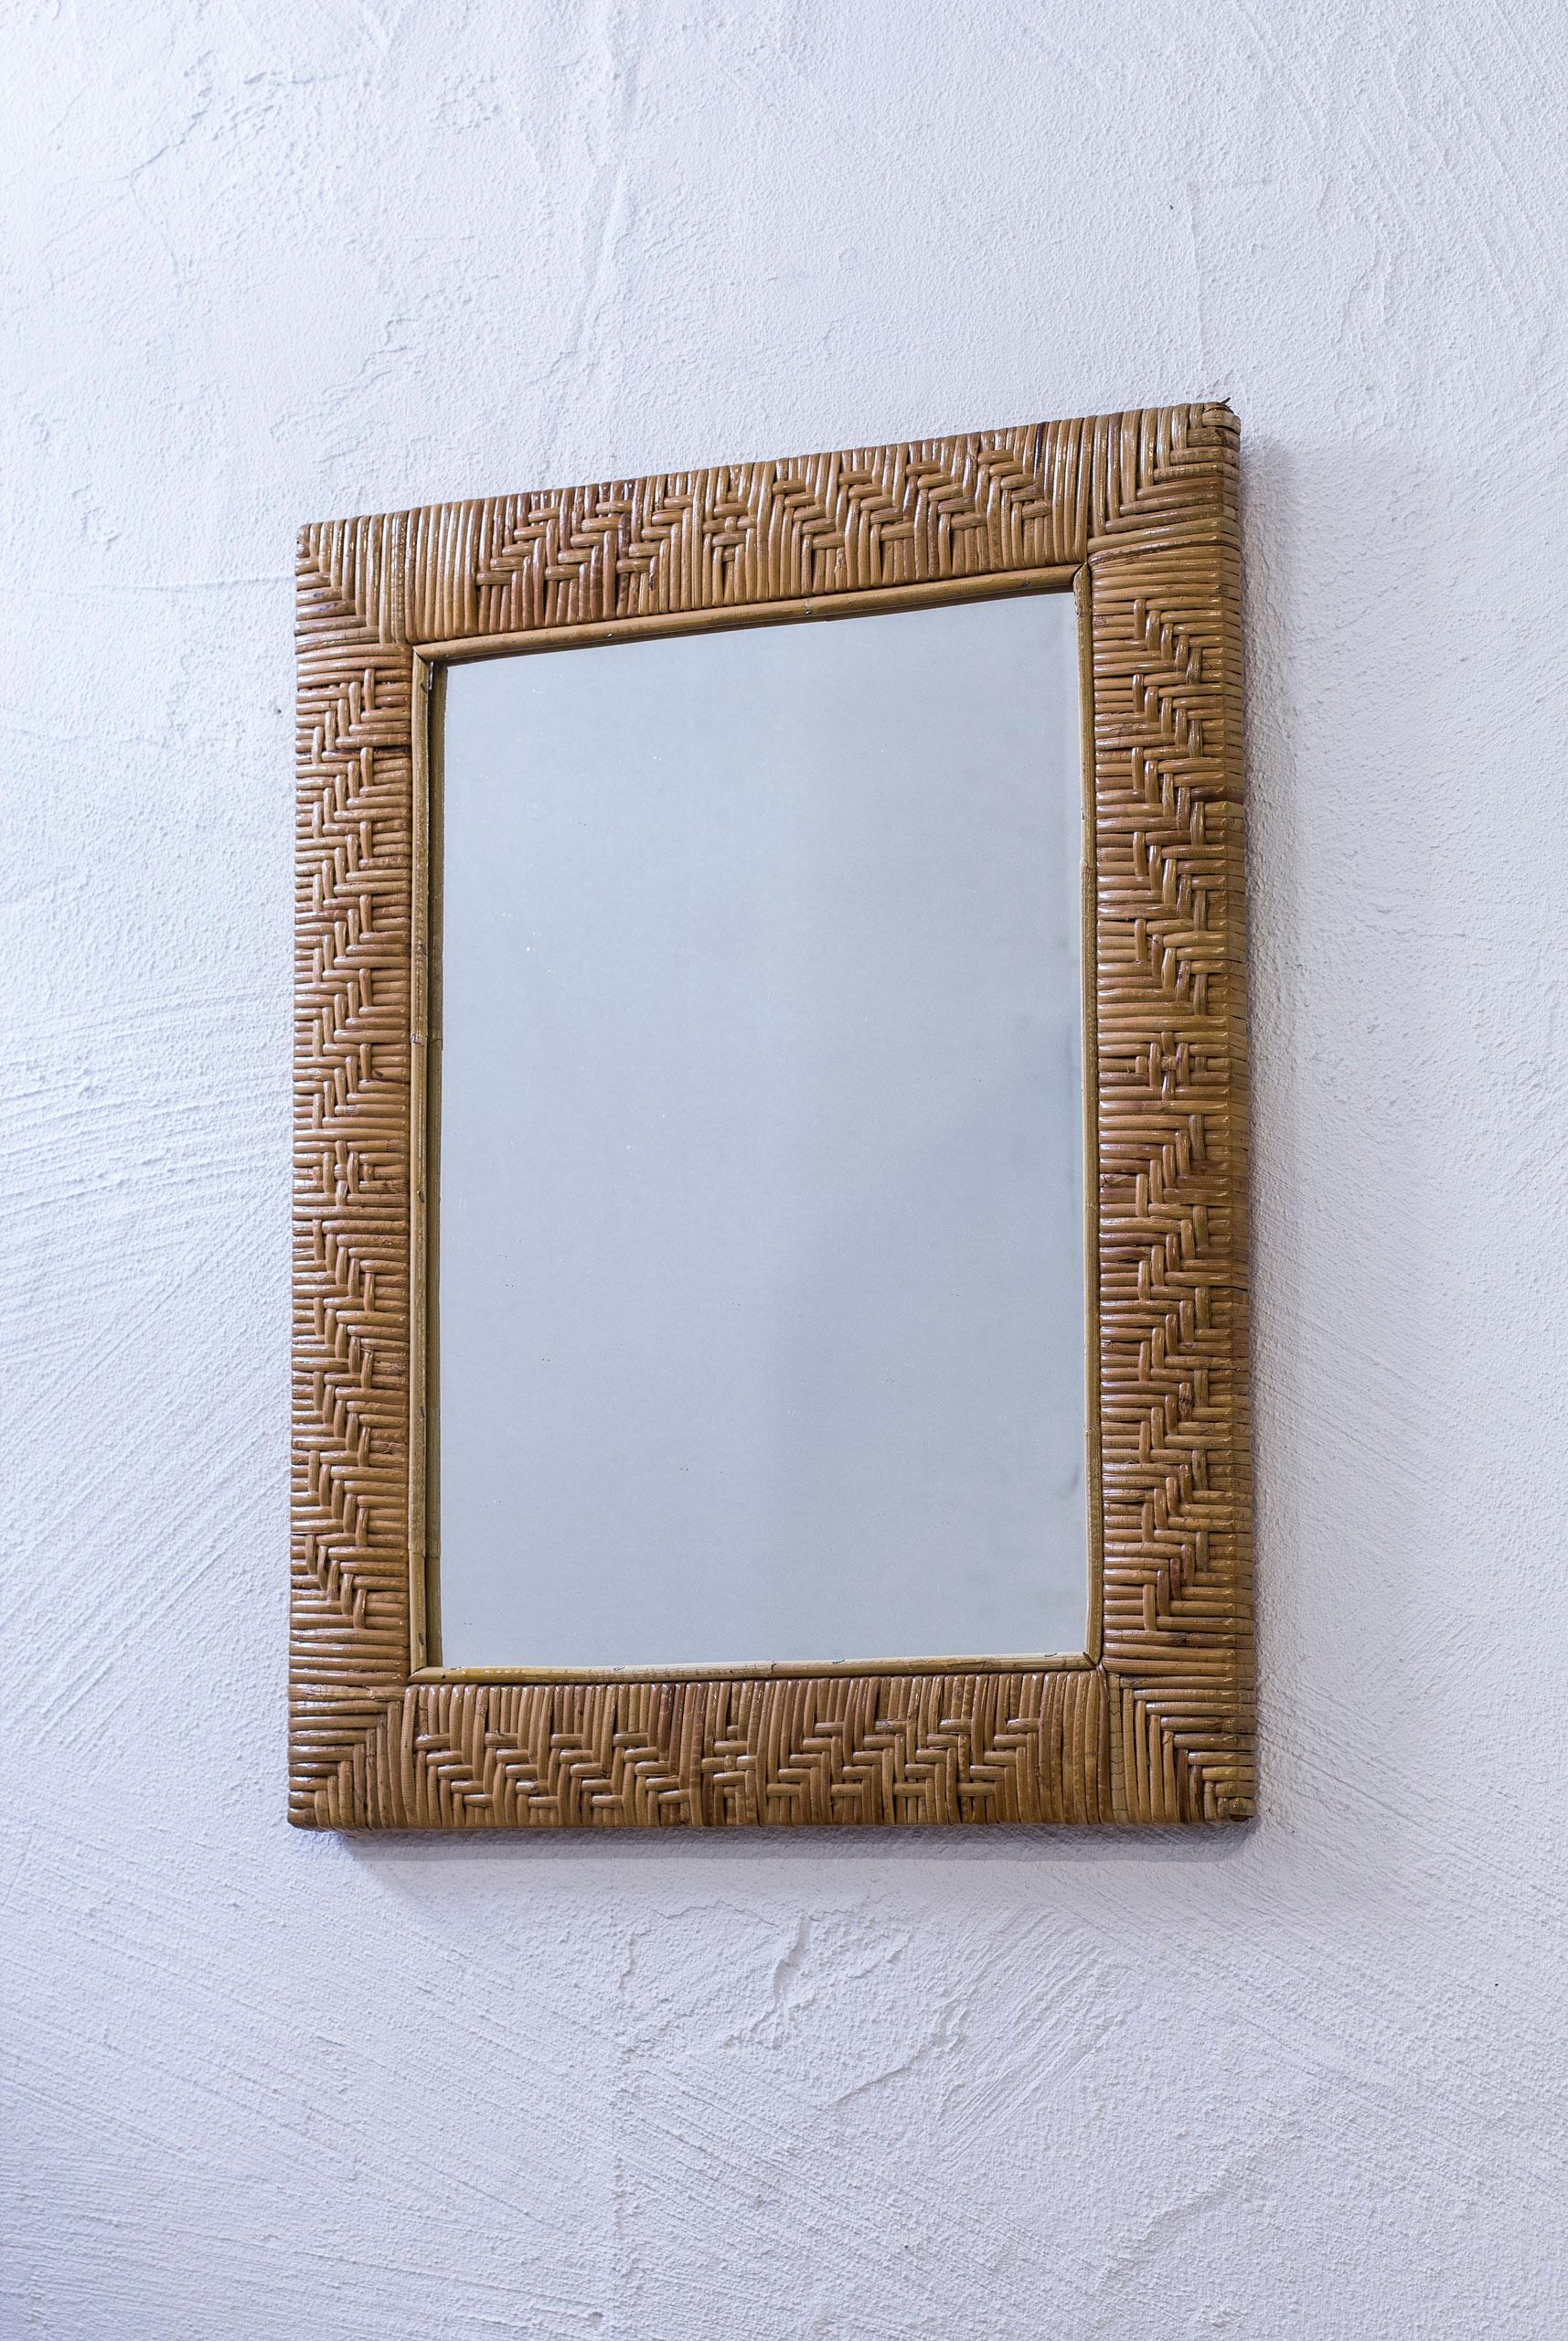 Mirror produced in Finland during the 1950s. Made from solid mahogany with rattan handwoven around the frame. Back part of mahogany as well. Excellent condition with few signs of patina and wear.
 